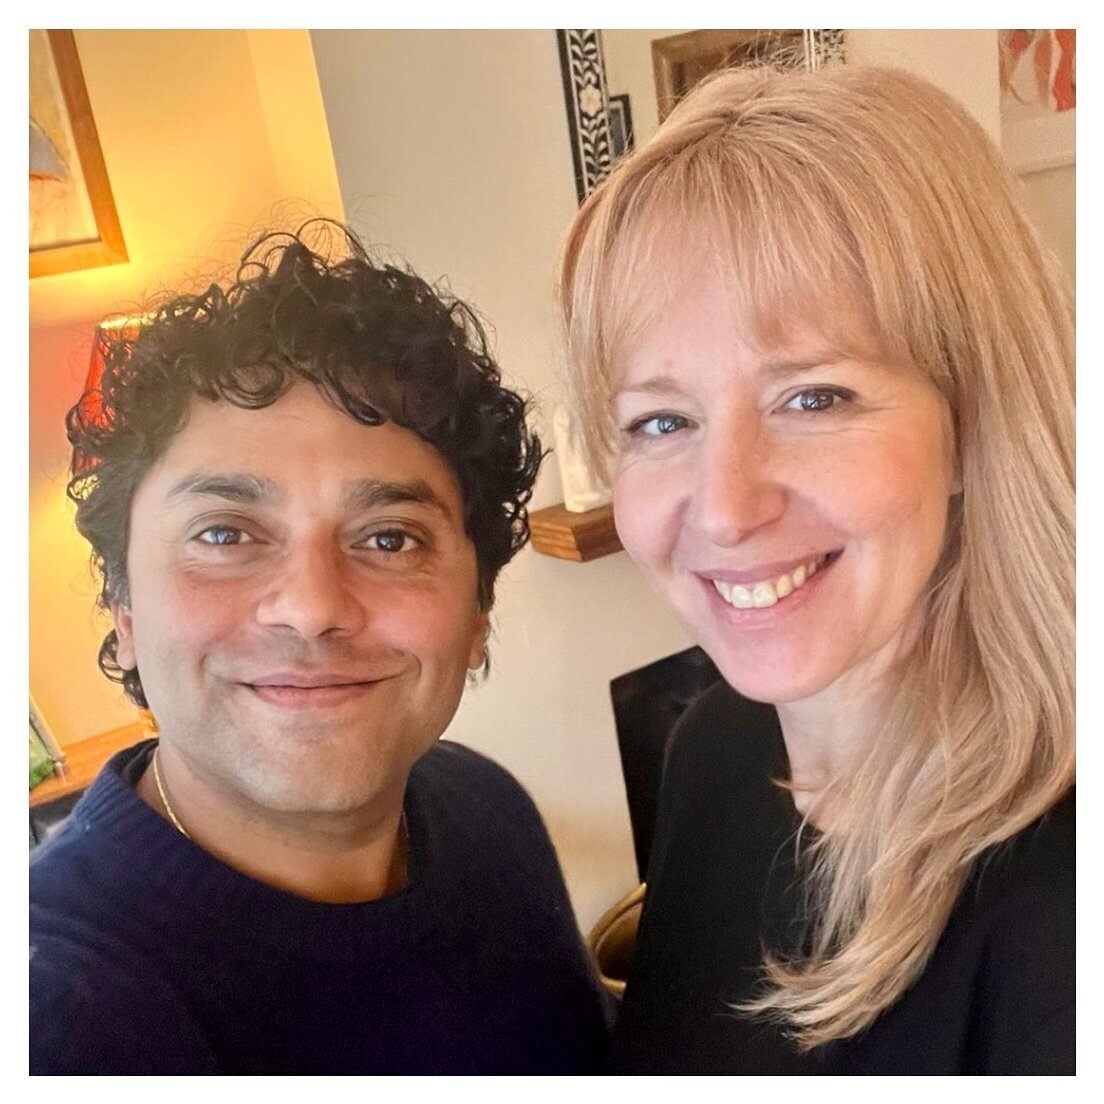 Hello,

Reintroducing ourselves to new &amp; existing followers.  We are Kevin &amp; Lisa, full-time Five Element Acupuncturist&rsquo;s. 

Due to changing algorithms we&rsquo;re not sure if many of you now see our posts, as we&rsquo;re not regularly 